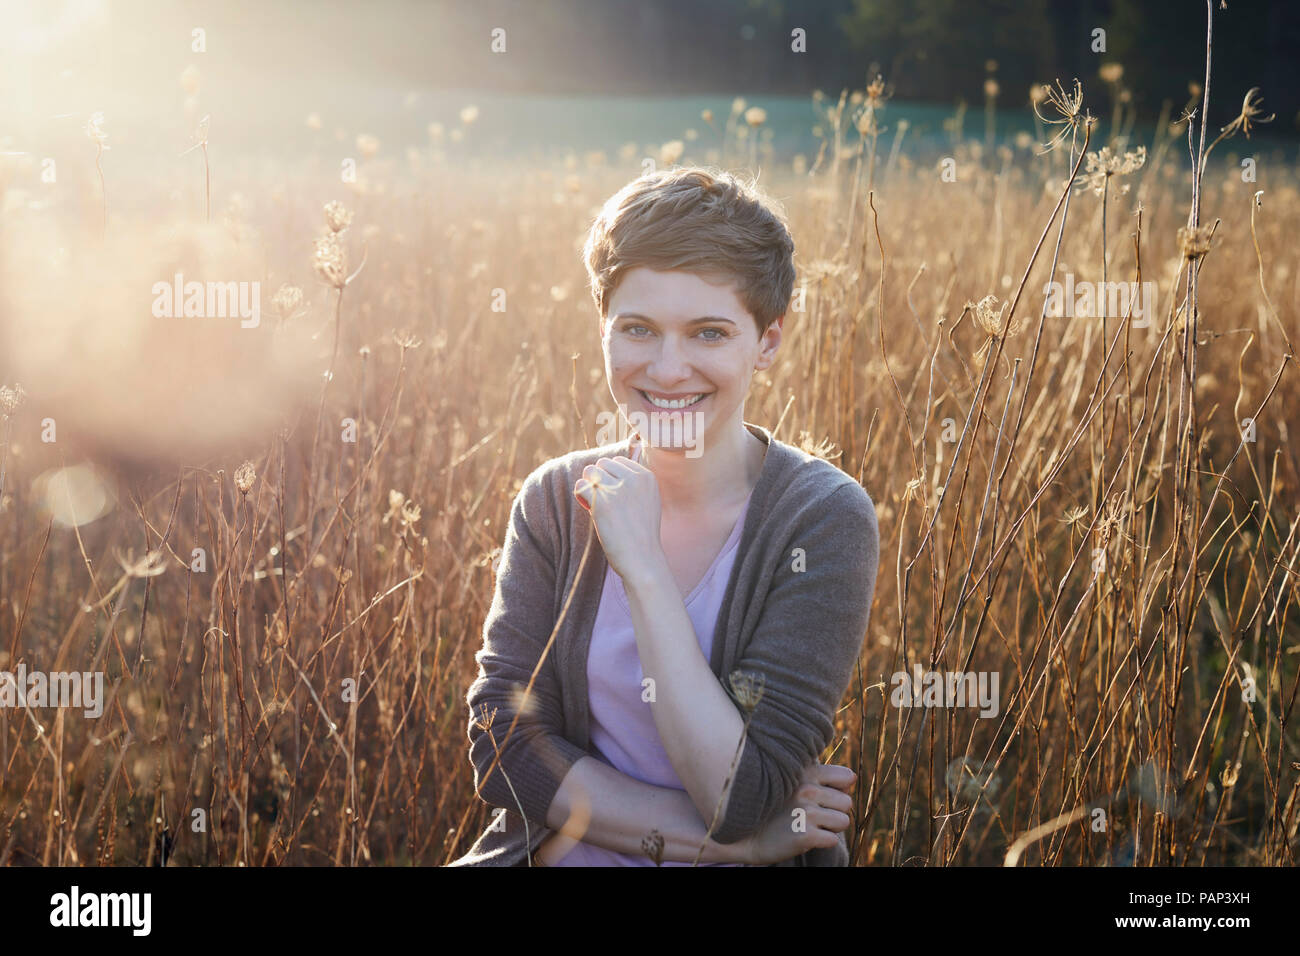 Portrait of smiling woman relaxing in nature Stock Photo